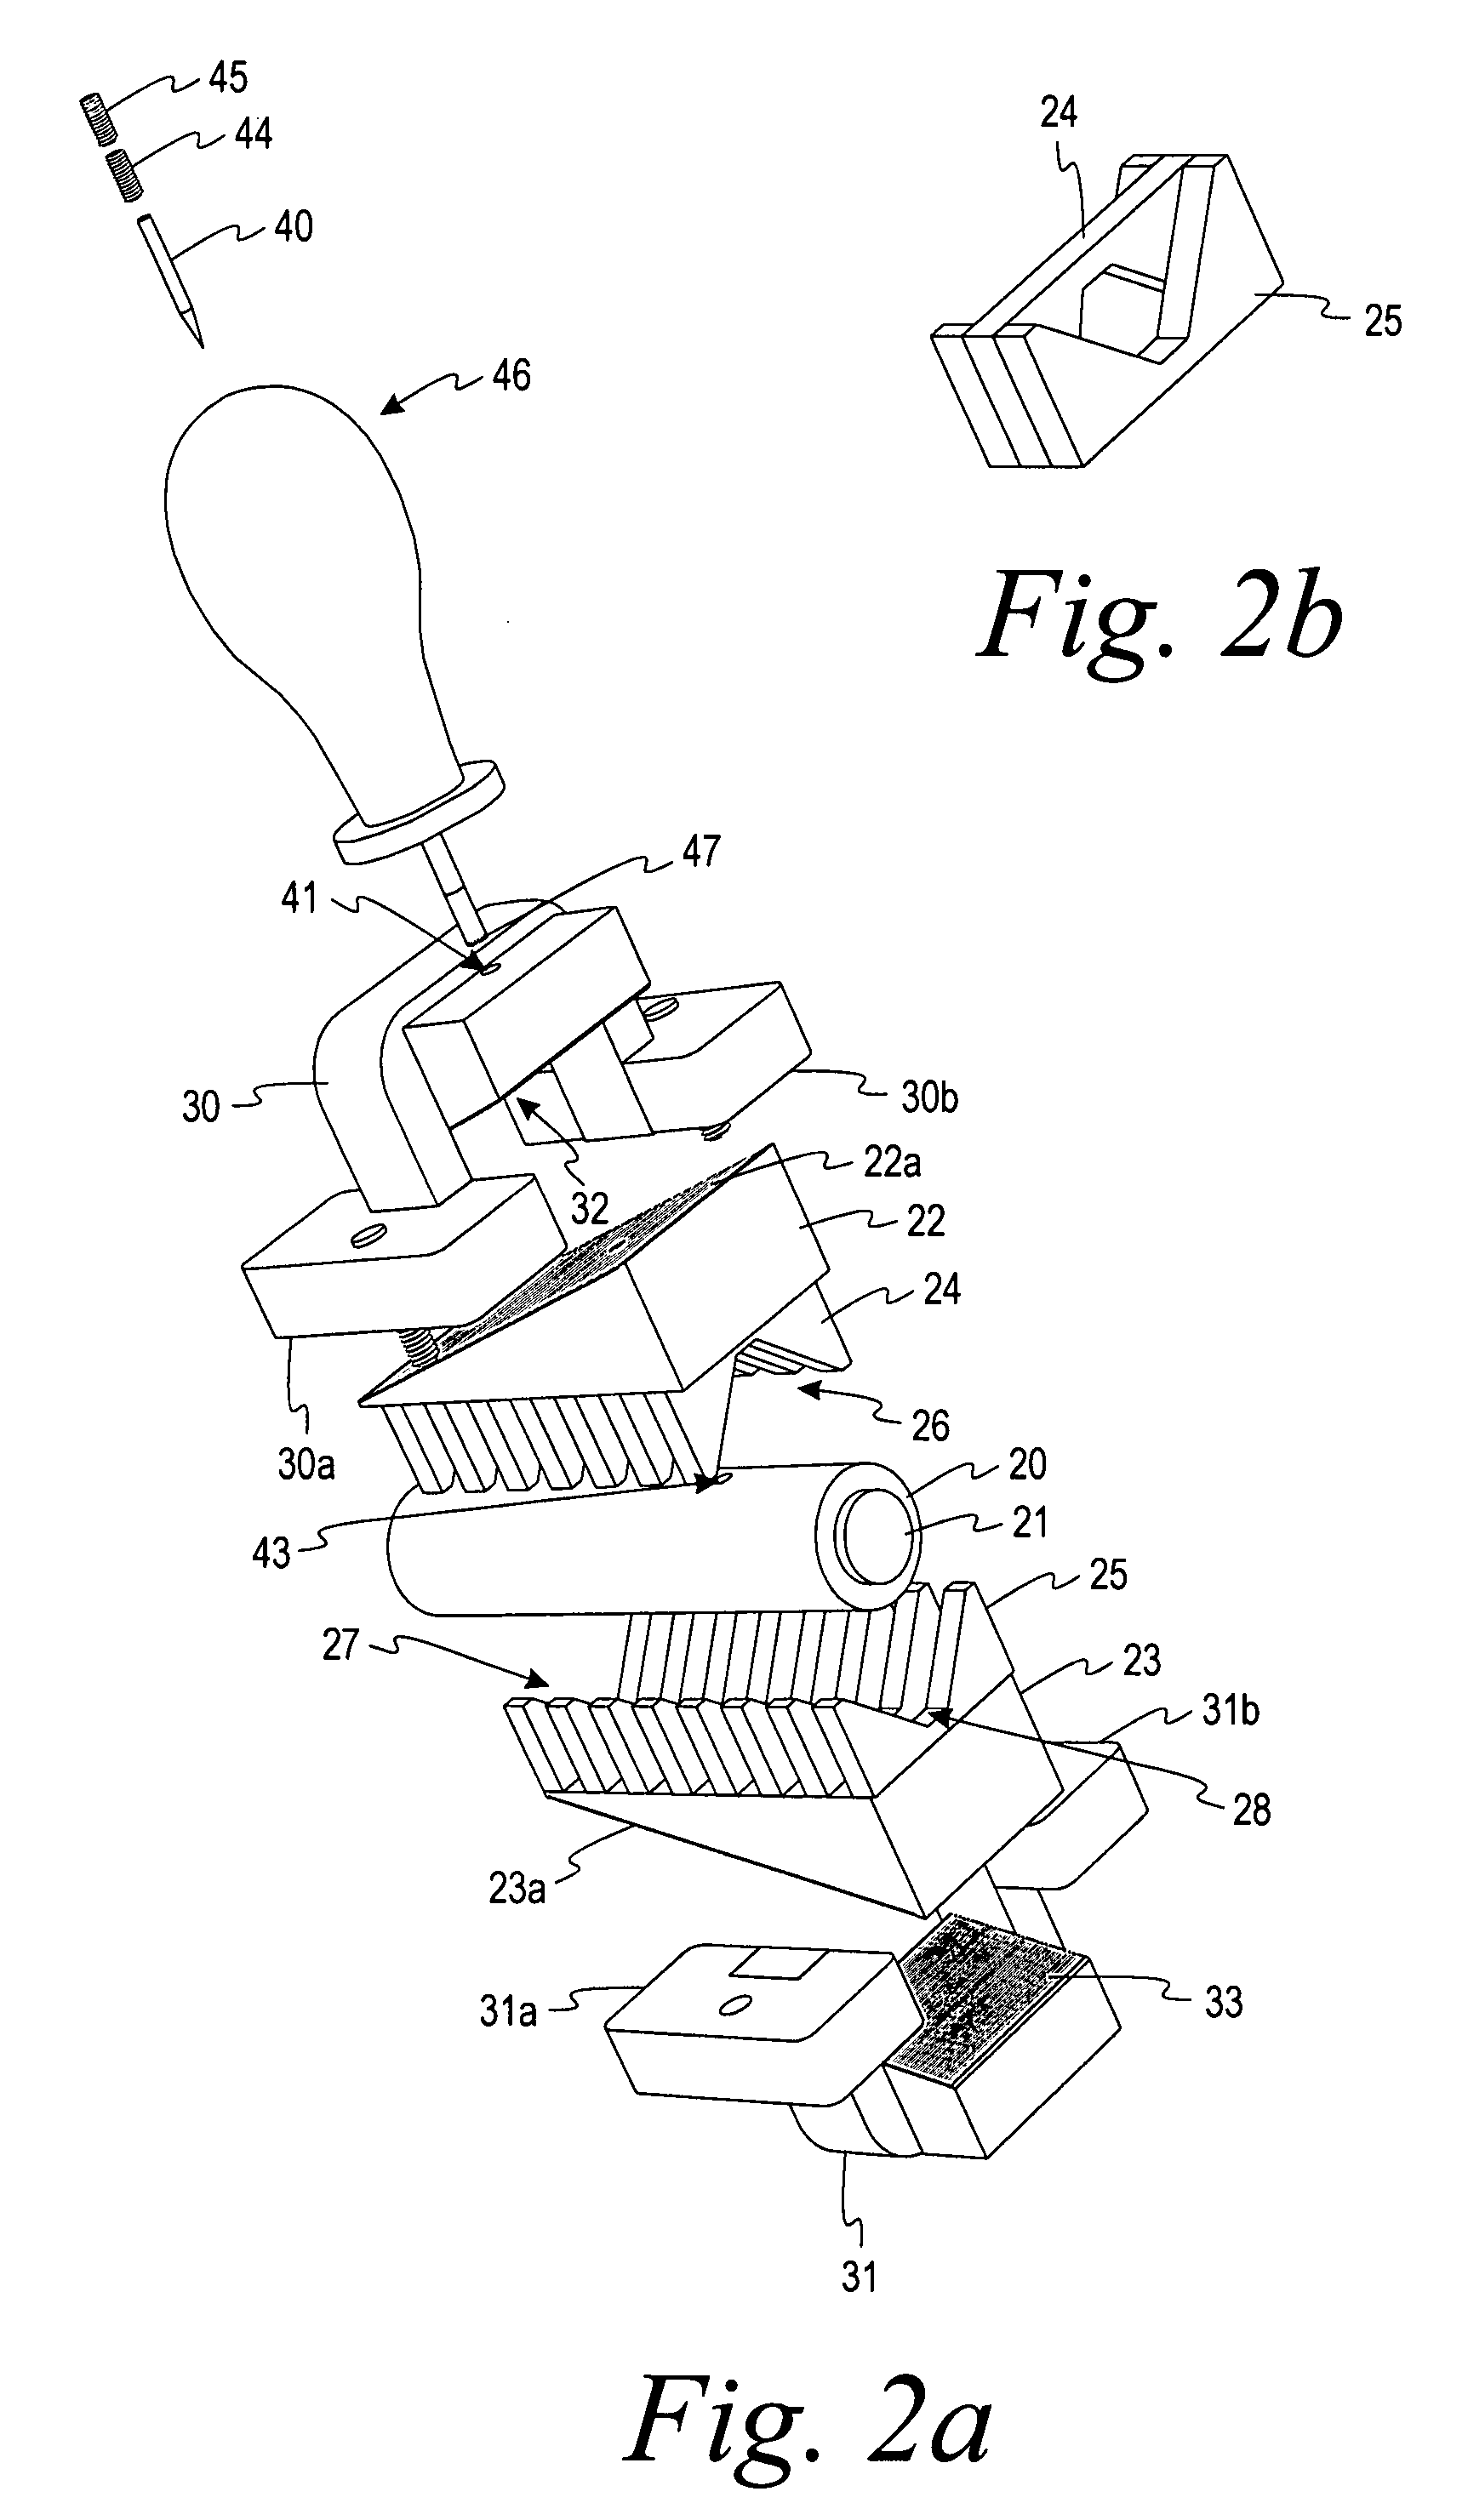 Clamp-on current and voltage module for a power monitoring system